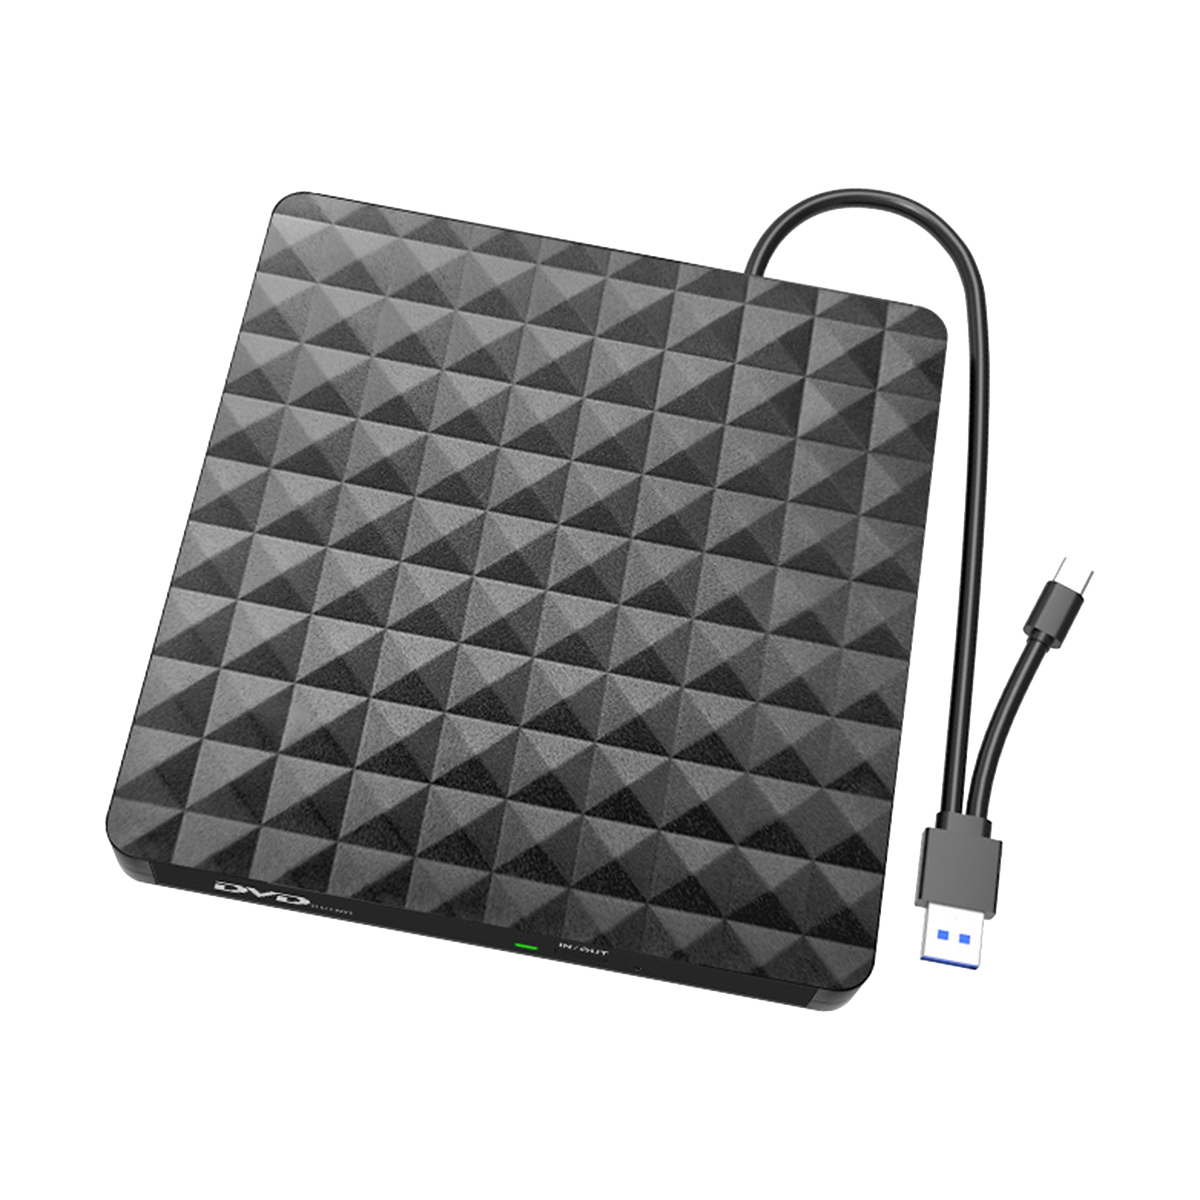 Find USB3 0 Type C External CD DVD Optical Drive High Speed Data Transfer External DVD RW Player External Burner Writer Rewriter for Computer PC Laptop XD002 for Sale on Gipsybee.com with cryptocurrencies